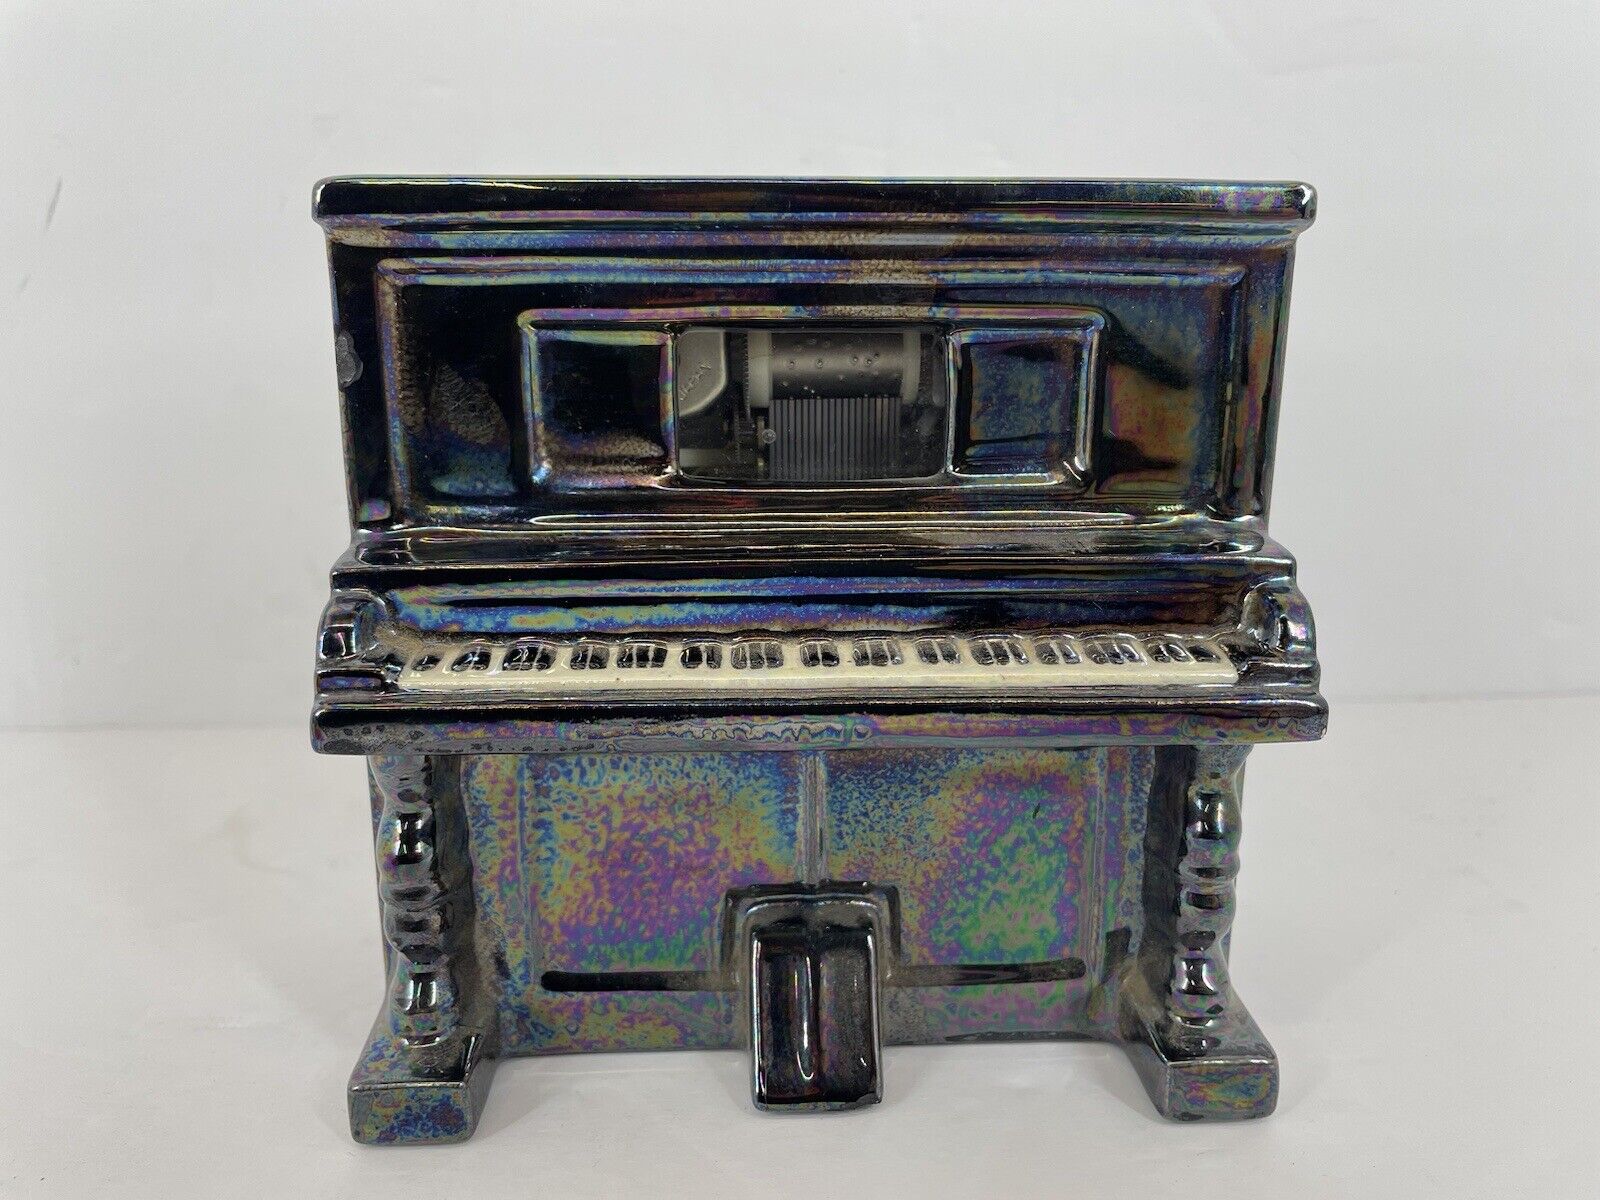 Vintage Upright Ceramic Piano Wind Up Music Box Works Great Plays Amazing Grace